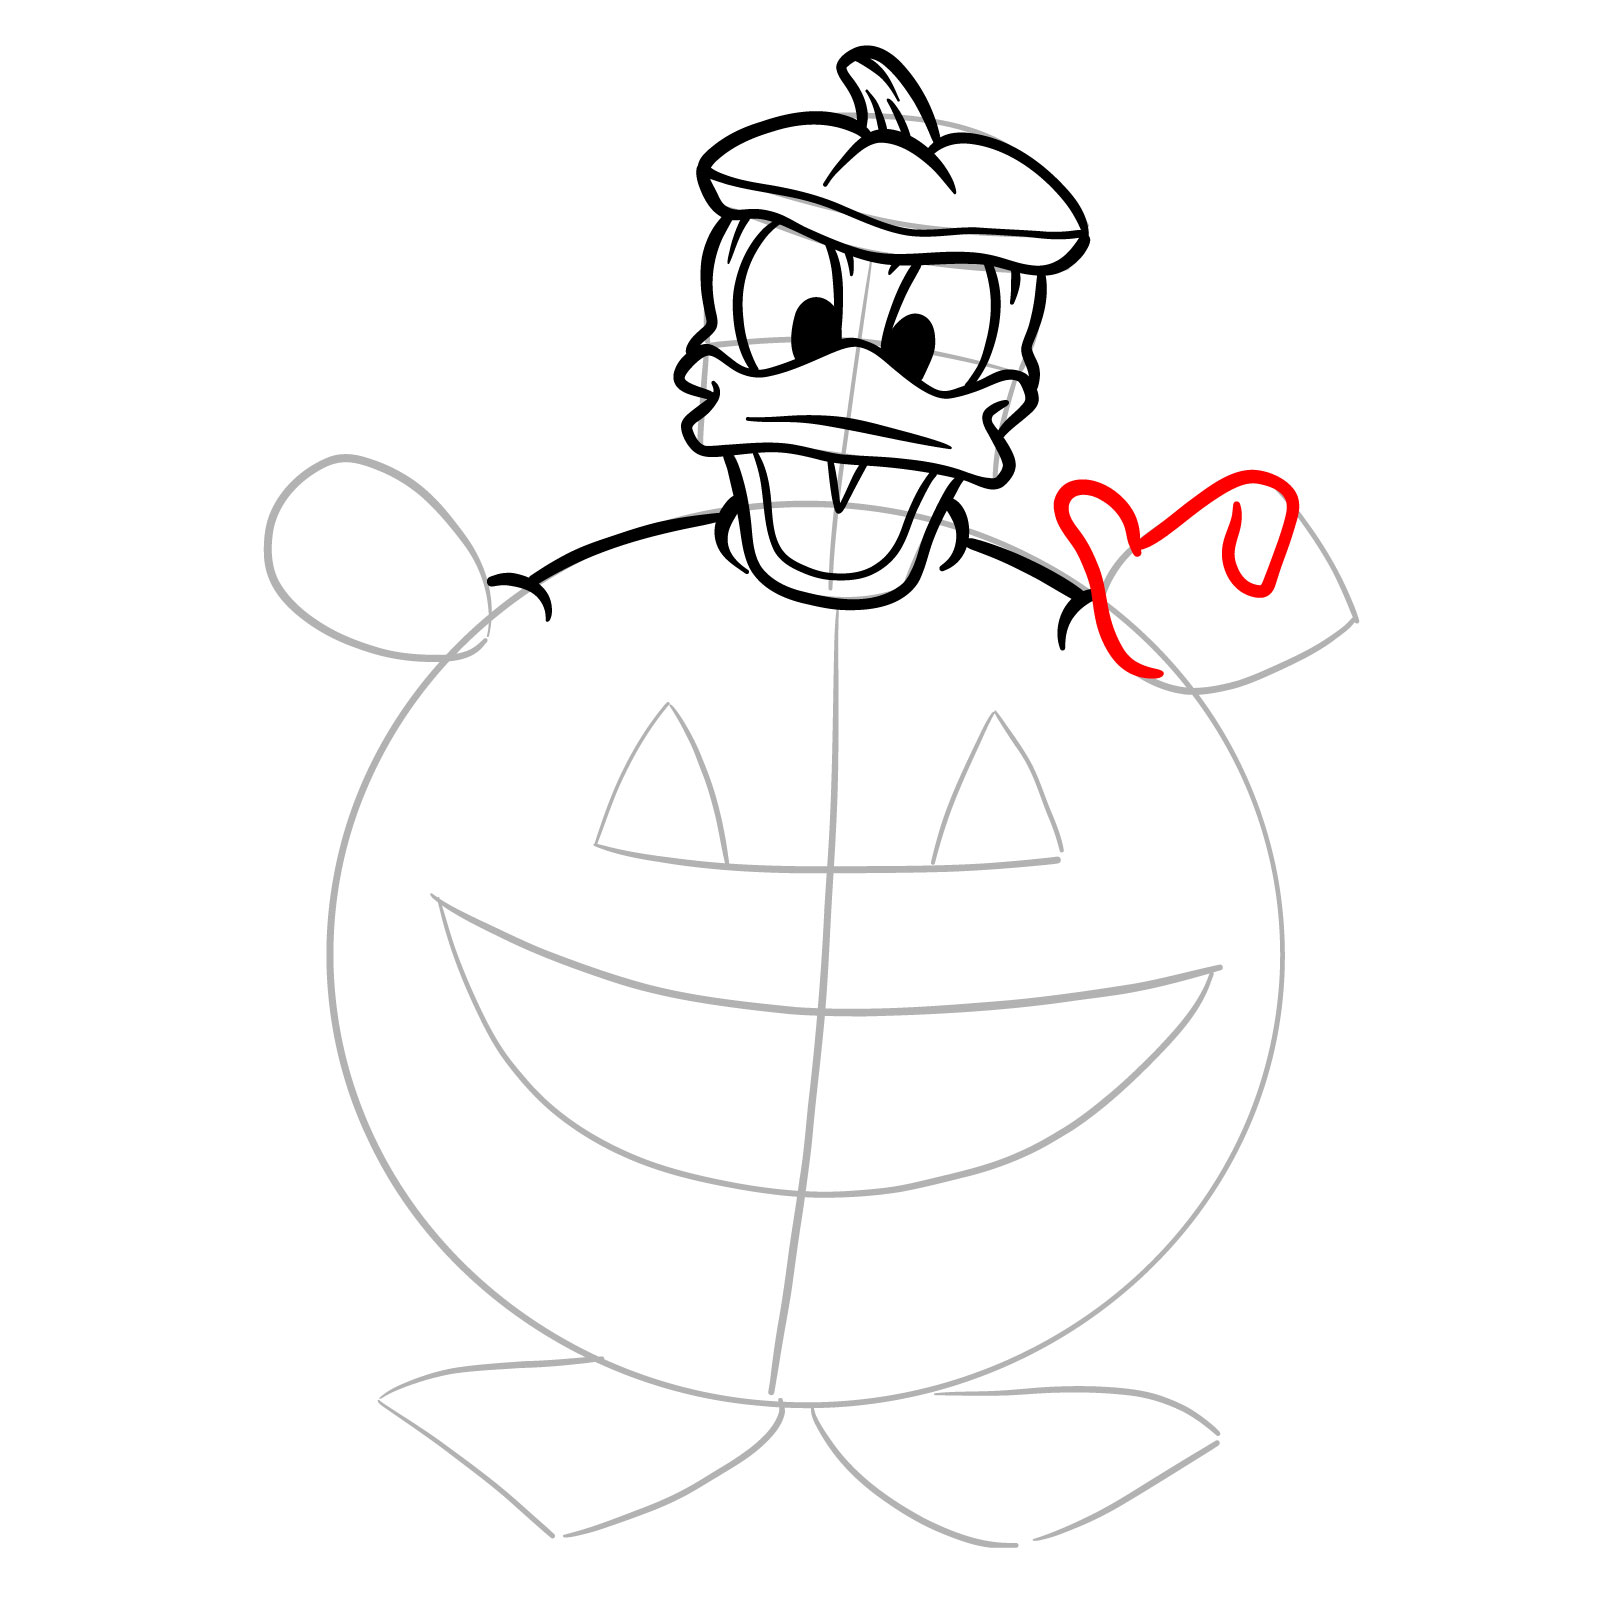 How to draw Halloween Donald Duck in a jack o'lantern - step 14